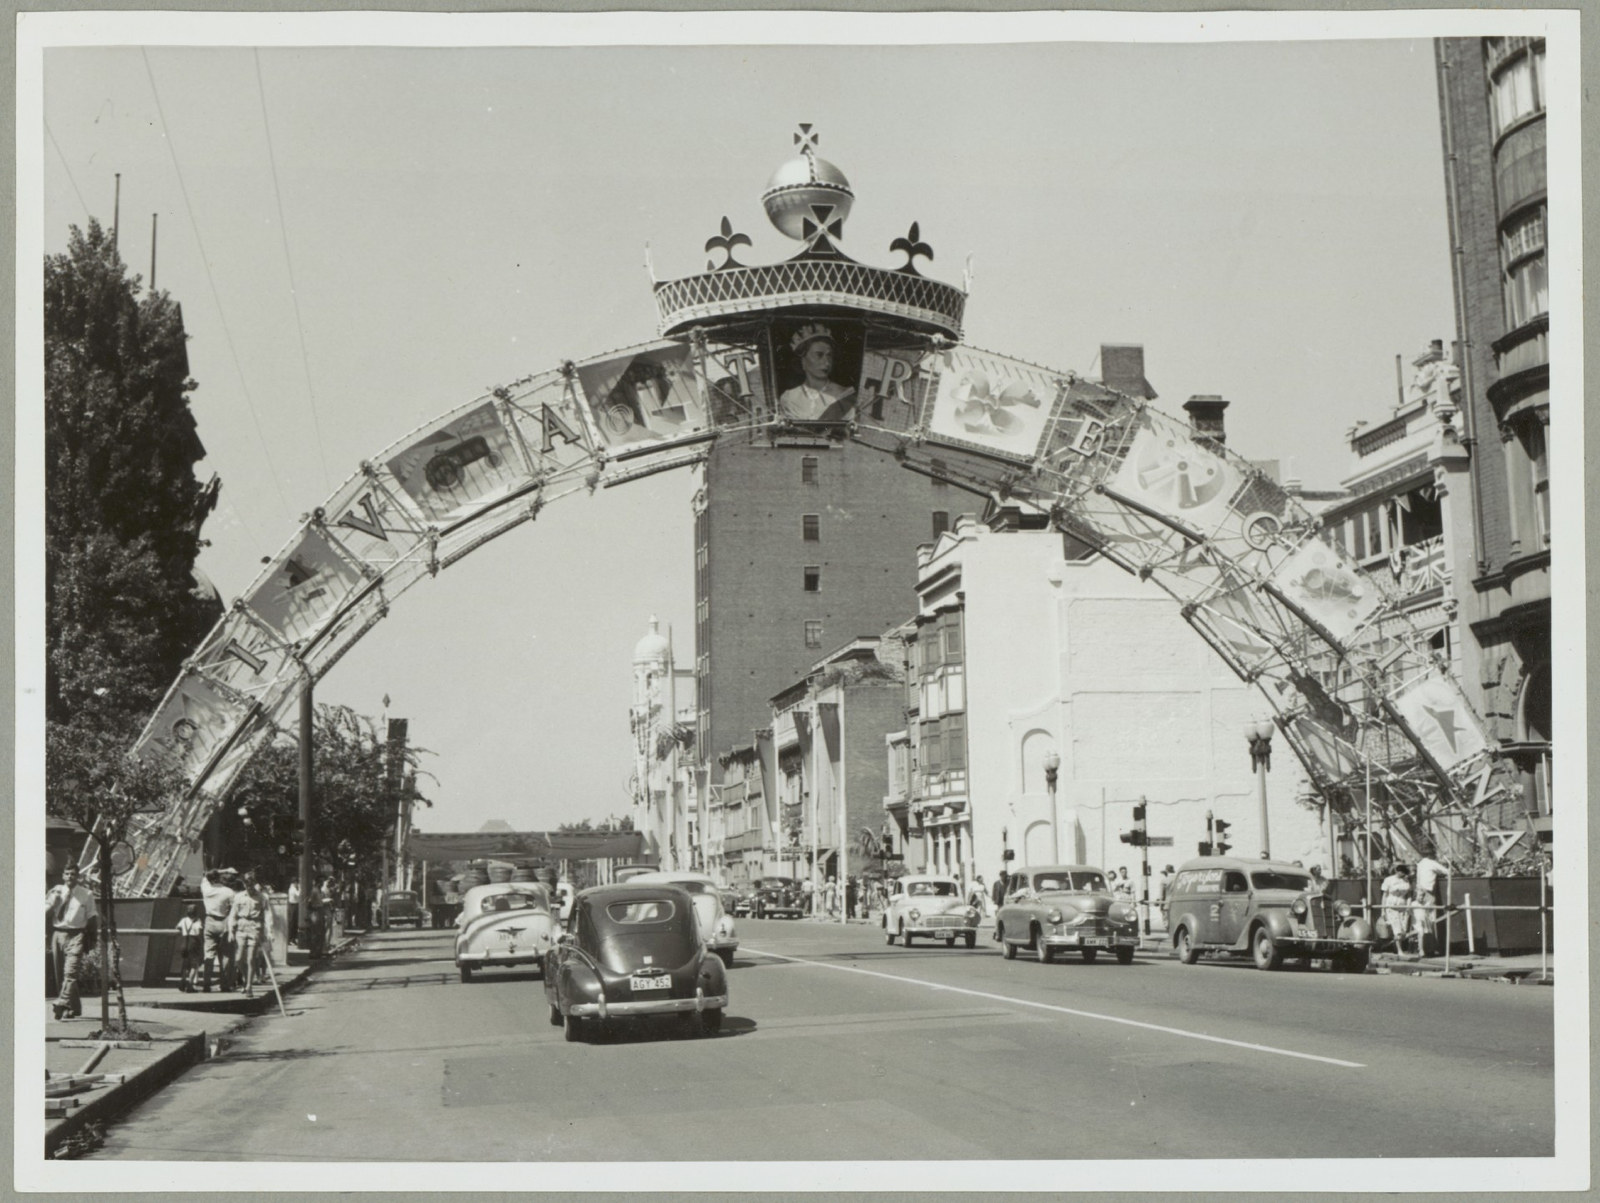 Sydney streets decorated for the 1954 Royal Visit